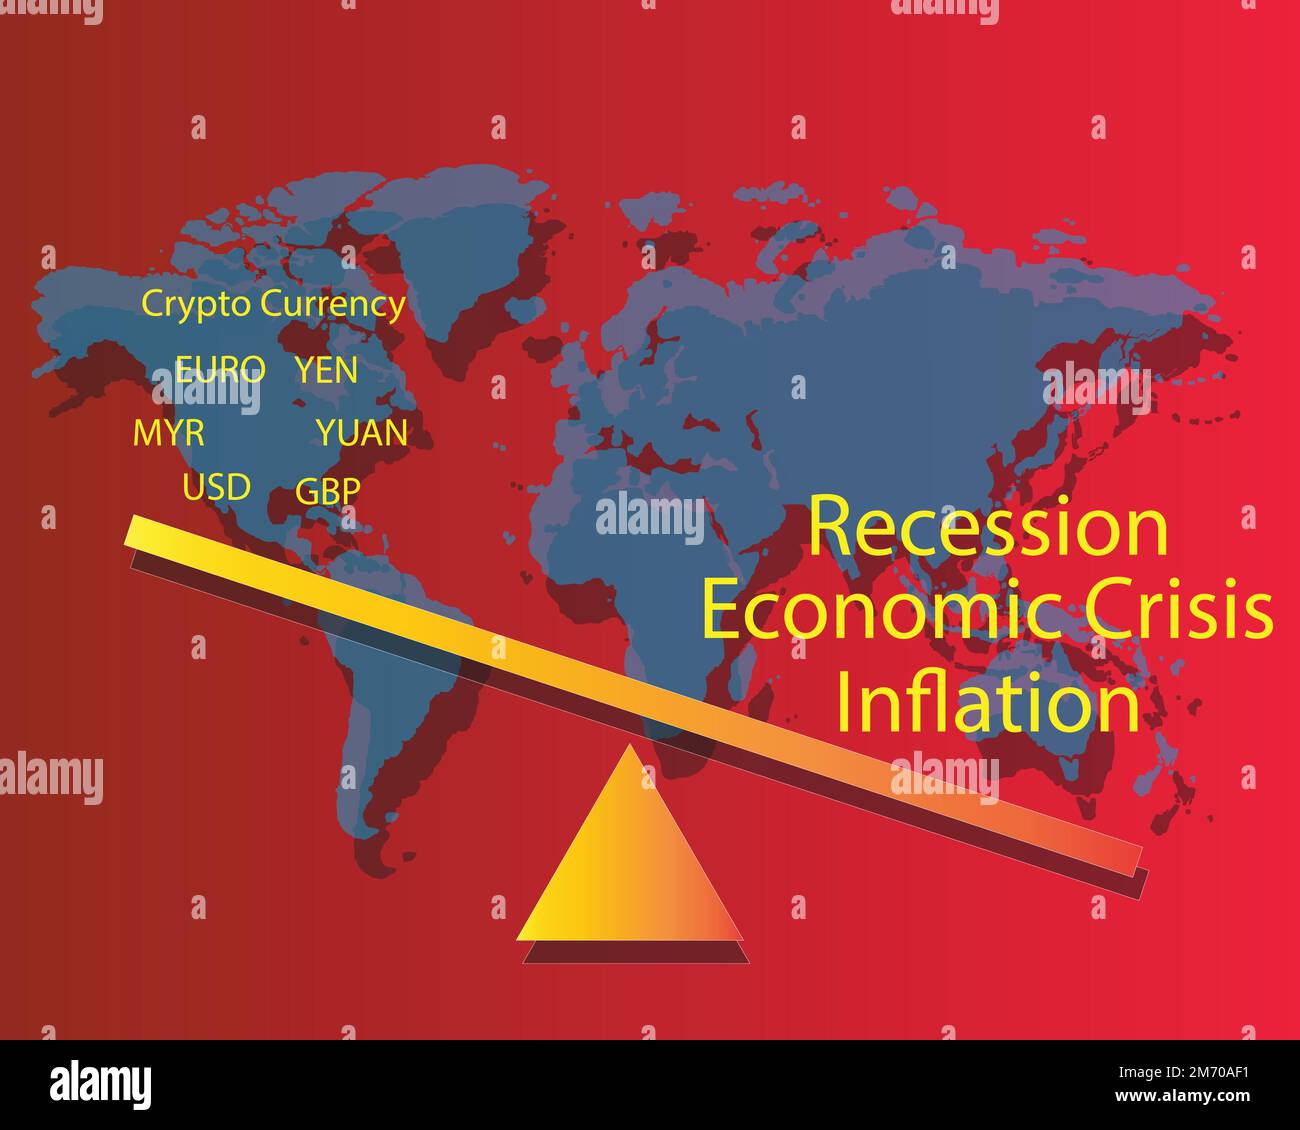 economic recession in 2023 Graphs and slumping stock markets show the global economic crisis in 2023. The effects of inflation, war, epidemics. EPS10 Stock Vector